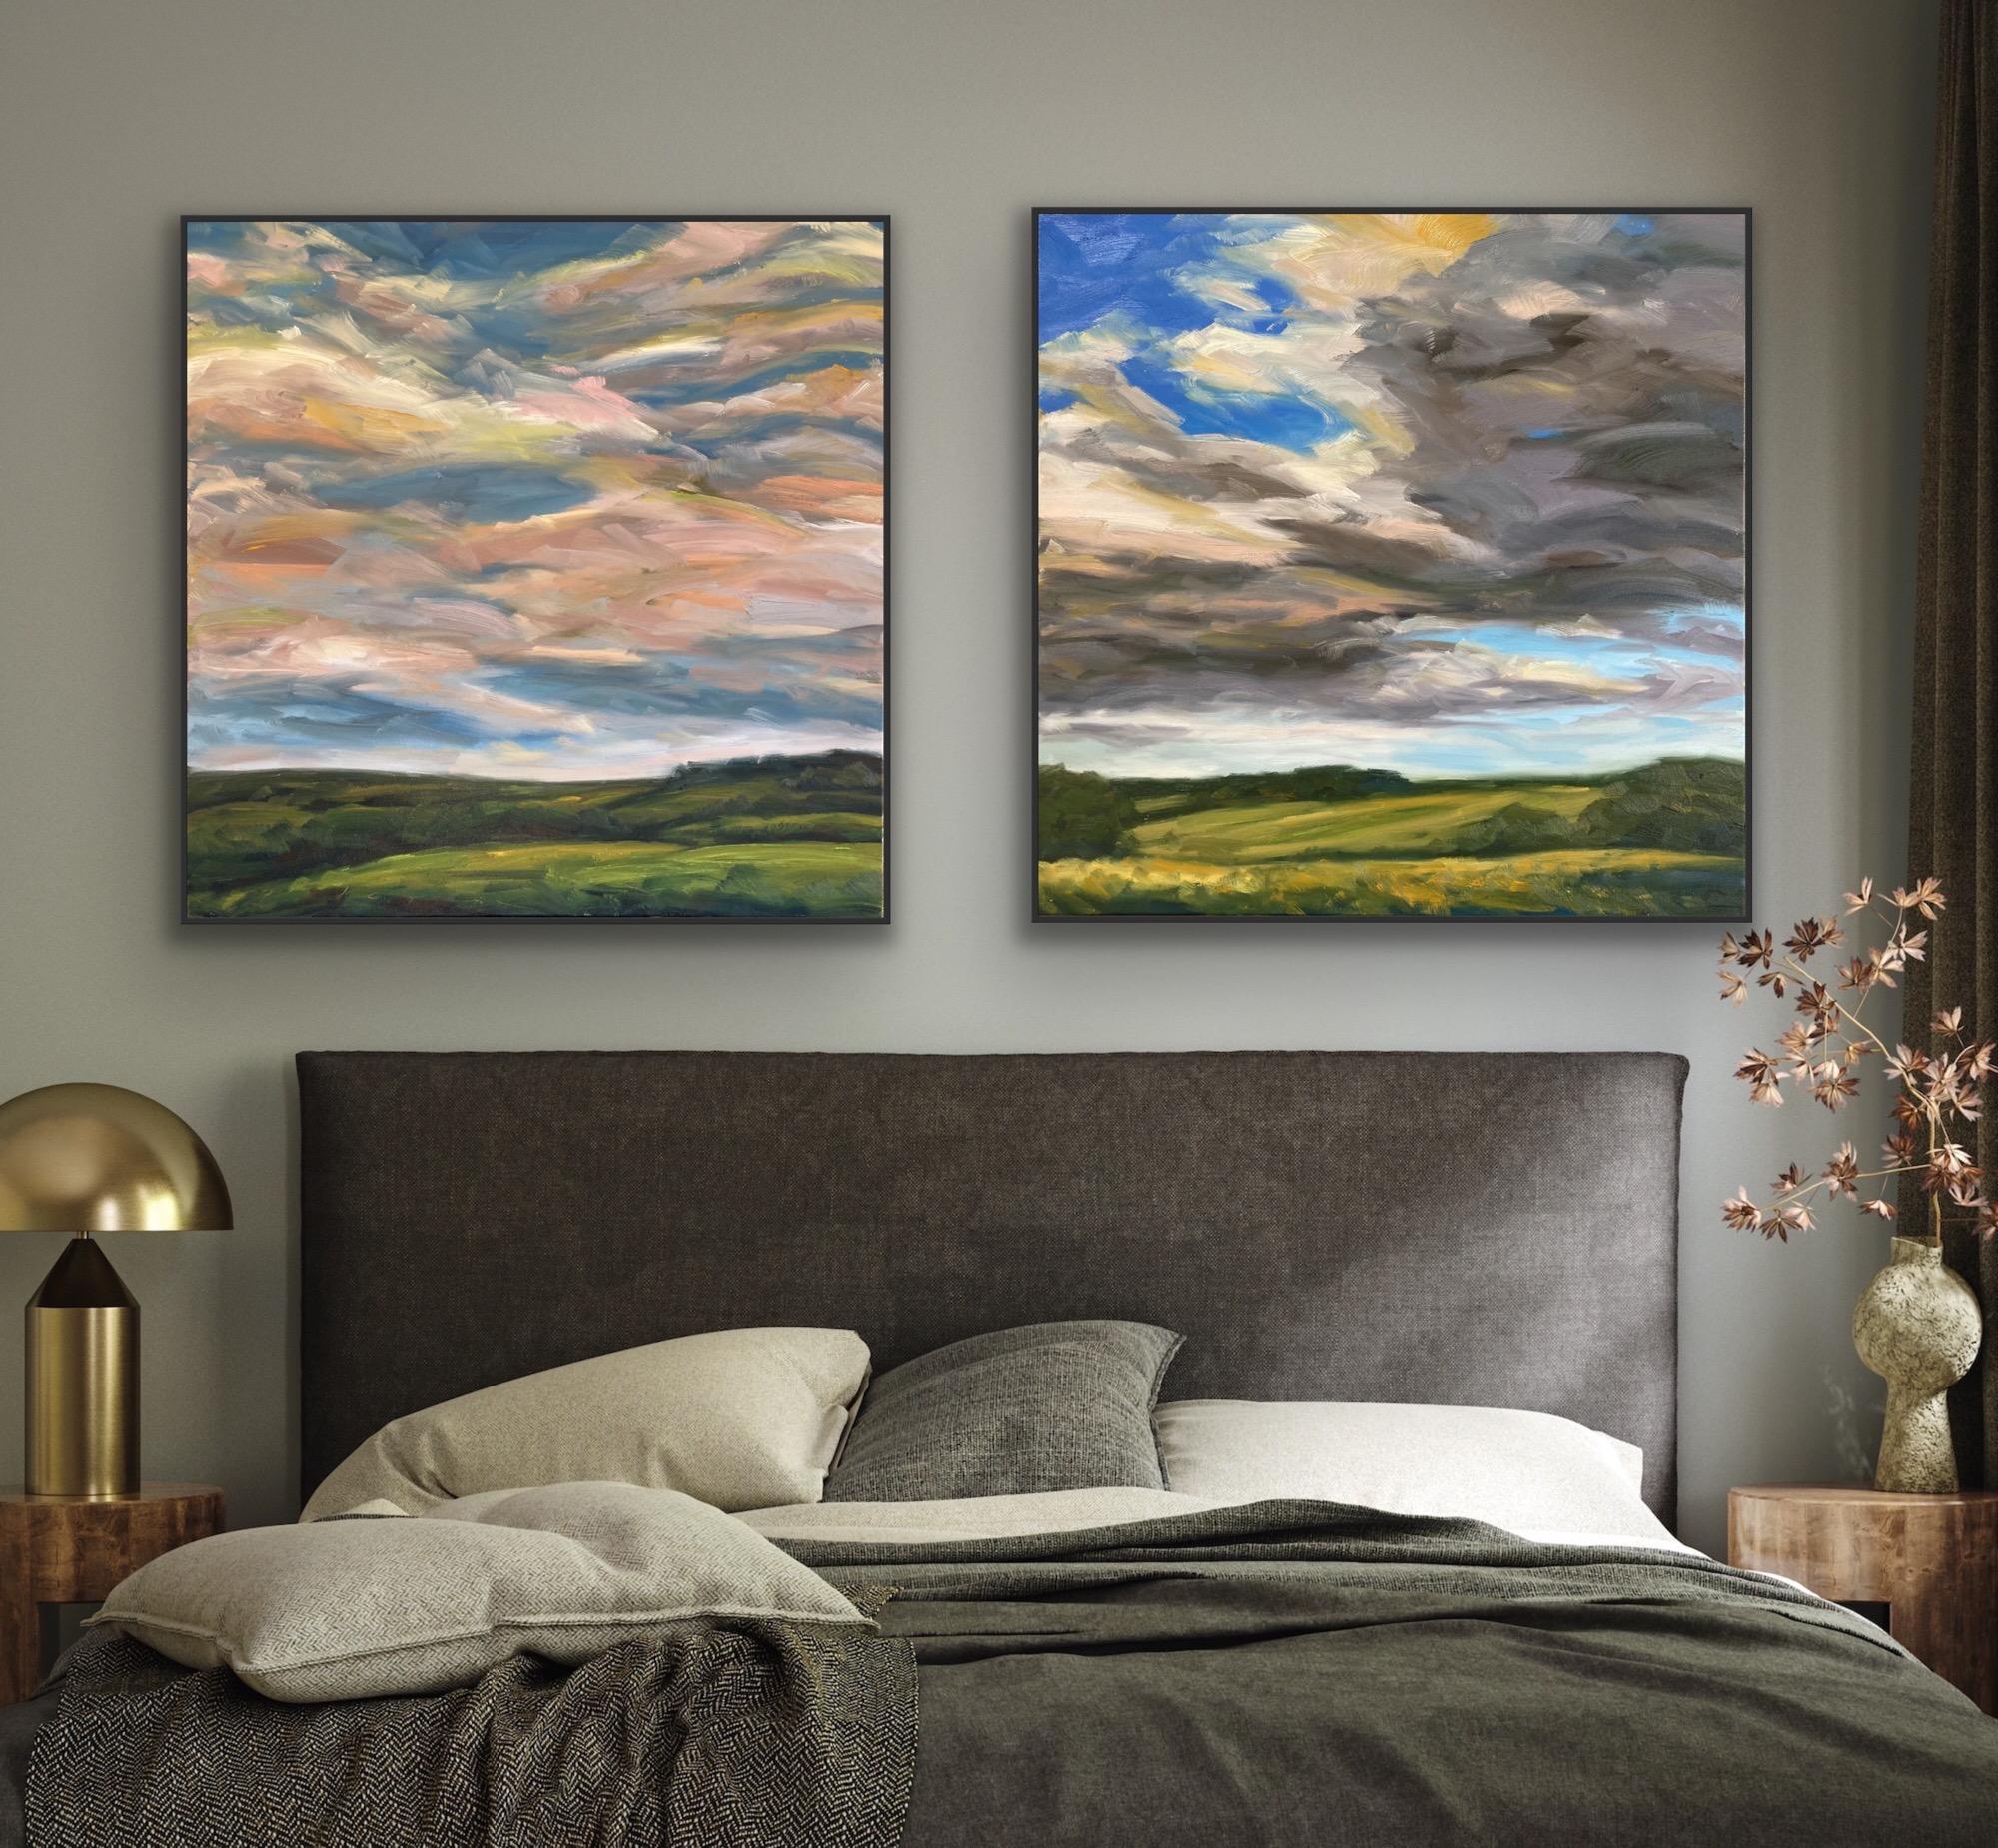 Suzanne Winn Landscape Painting - Diptych of Summer Fresh I and Floating On A Breeze, Original painting, Landscape